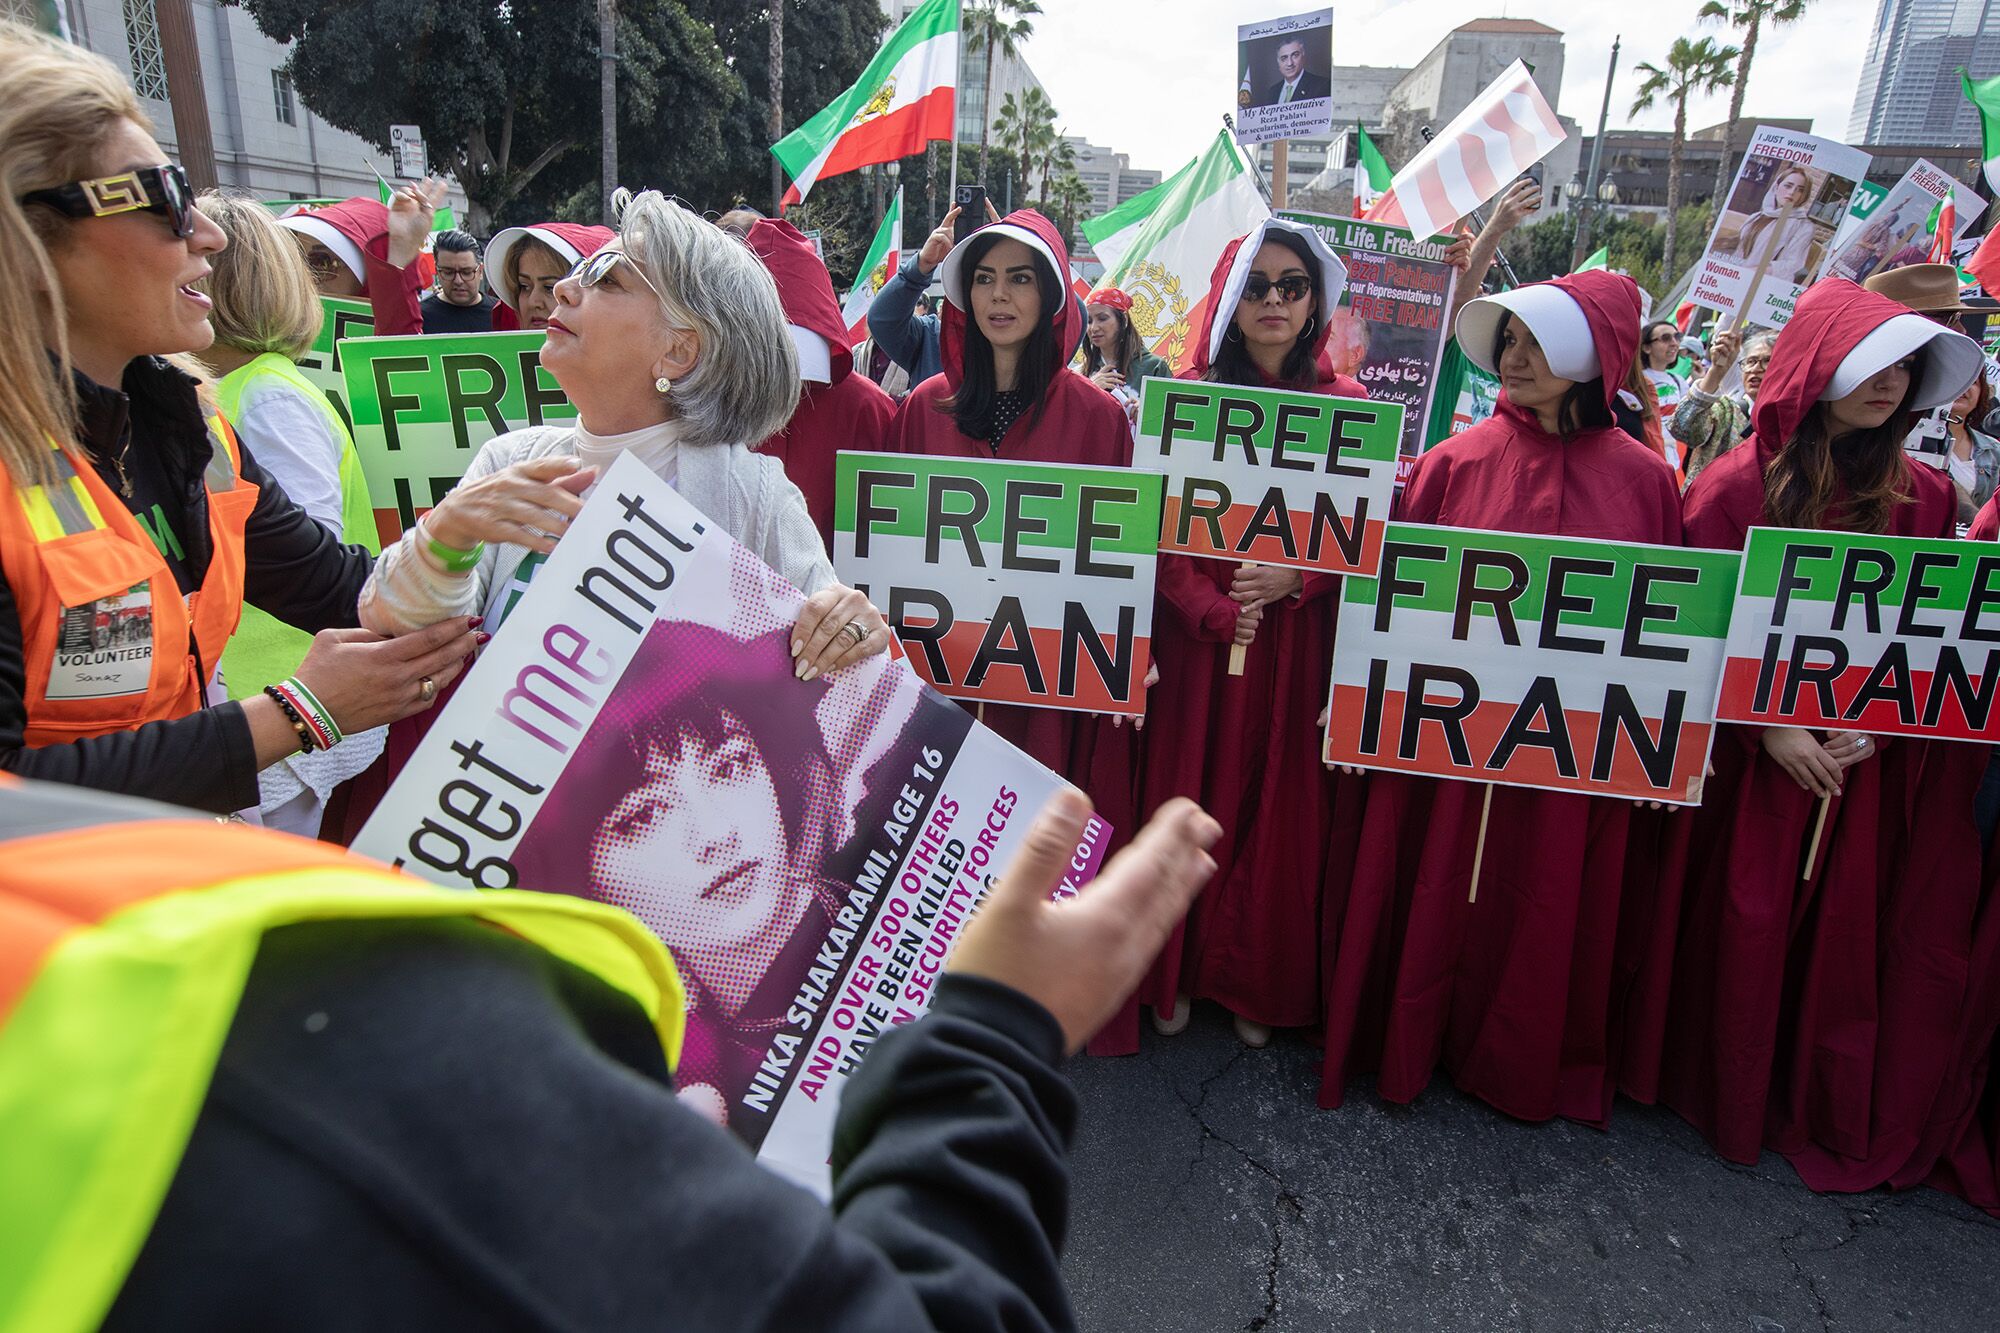 People dressed as characters from "The Handmaid's Tale" hold signs saying "Free Iran"